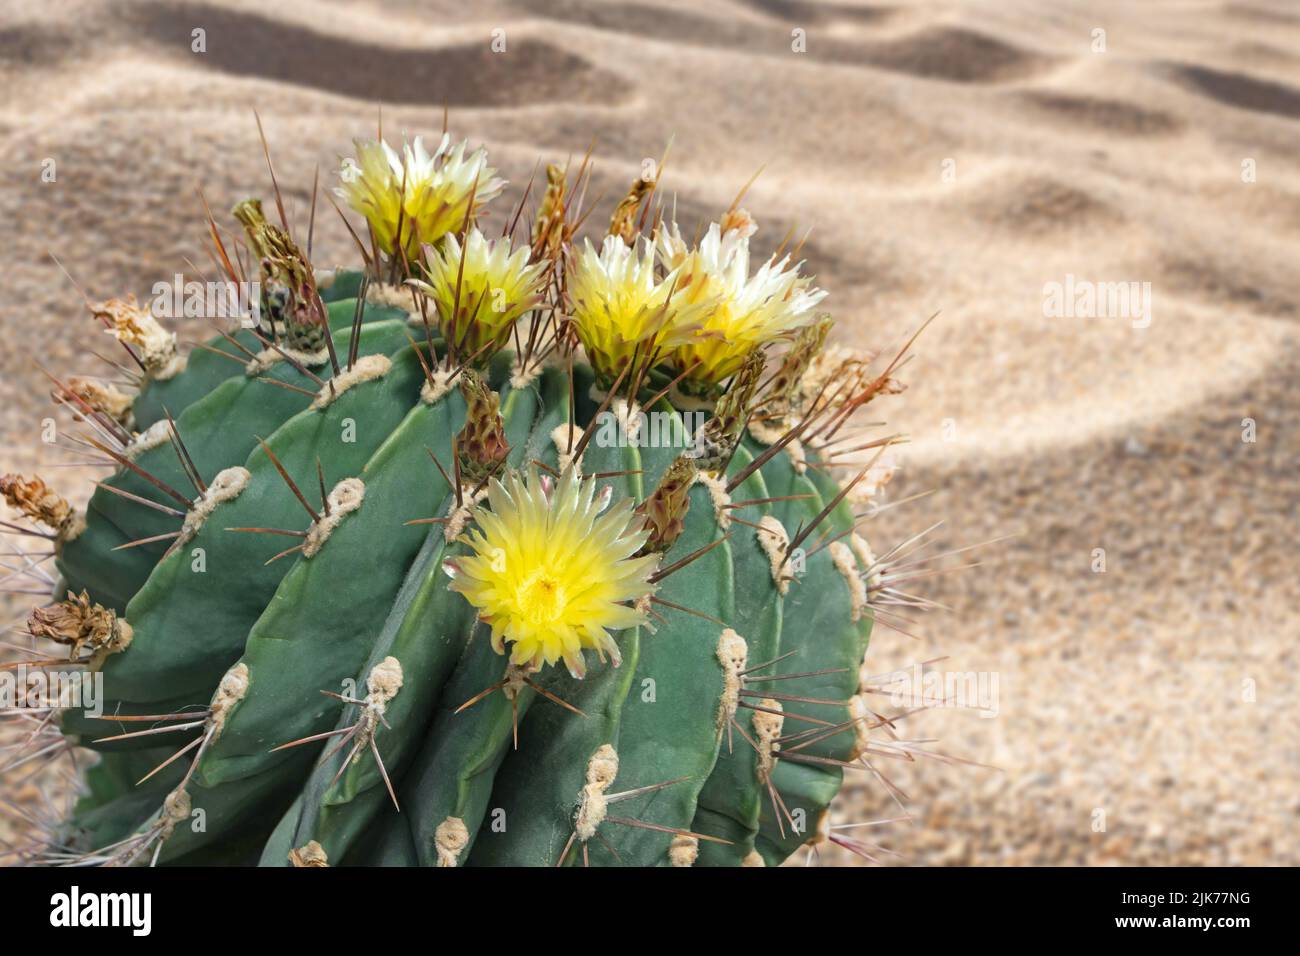 Cactus flowering with yellow flowers in the sand desert. Decorative globular succulent plant. Stock Photo